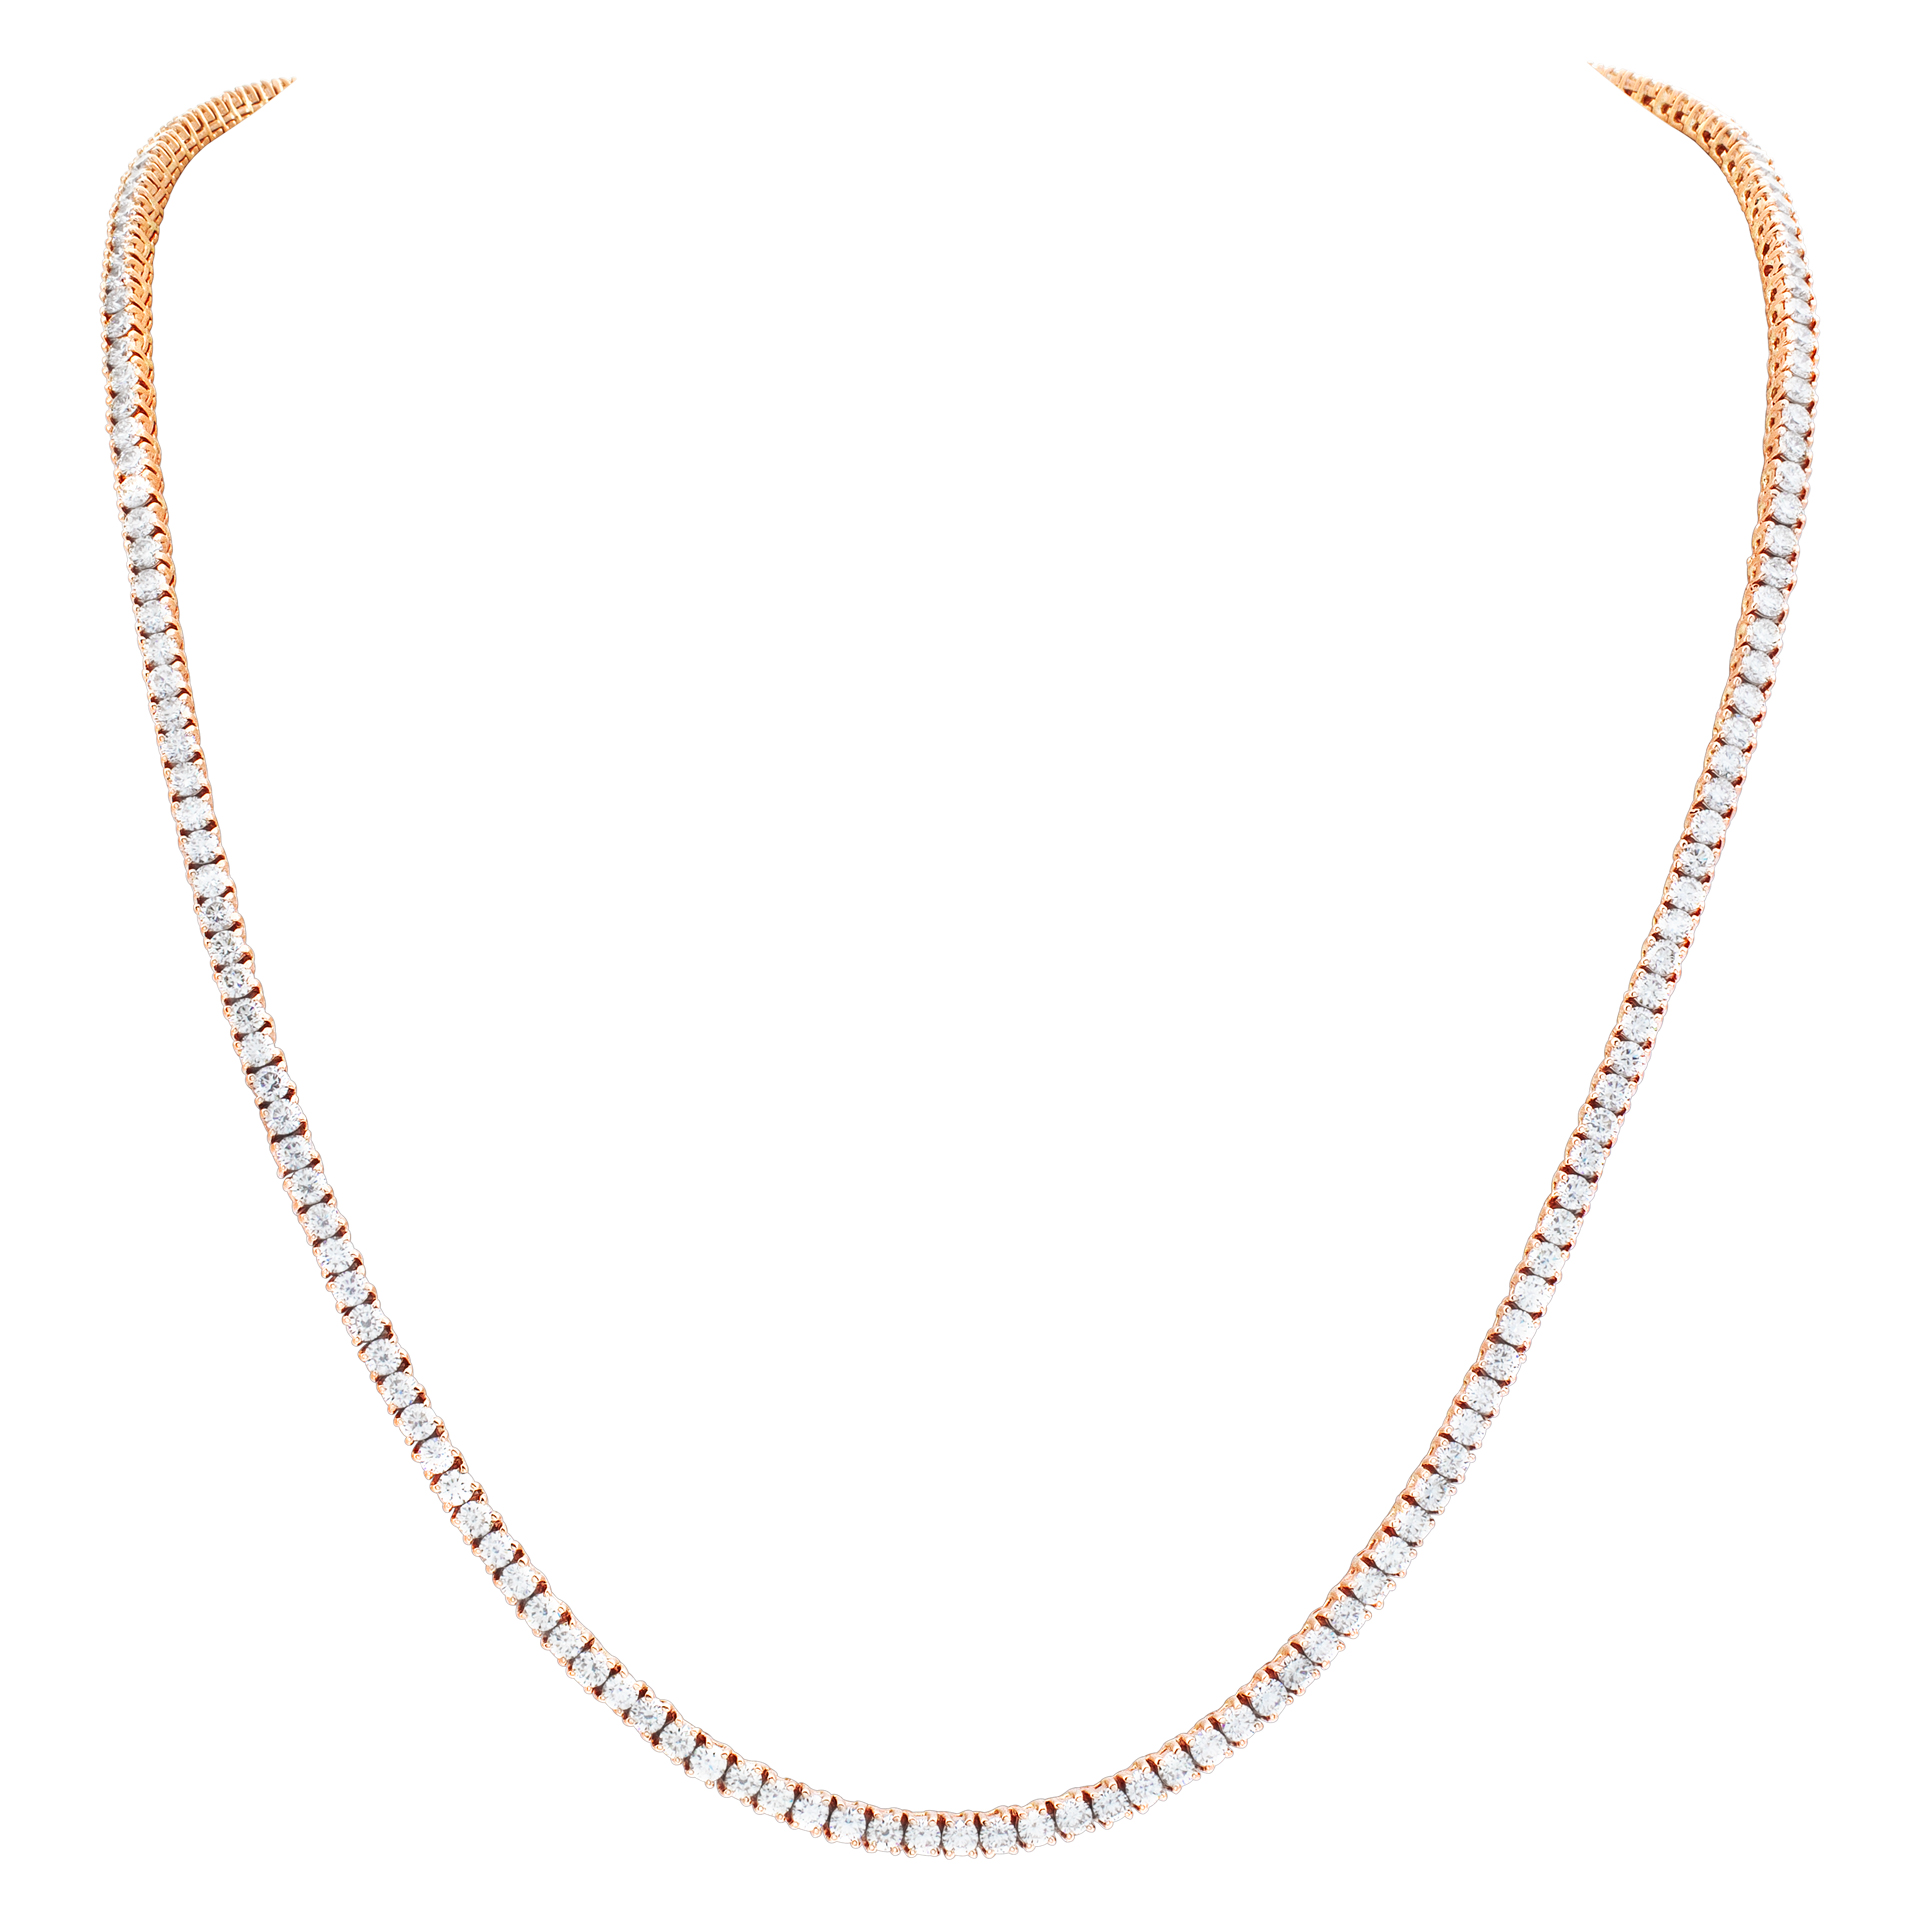 Line  necklace with 17.85 carats full cut round brilliant diamonds set in 14K rose gold.